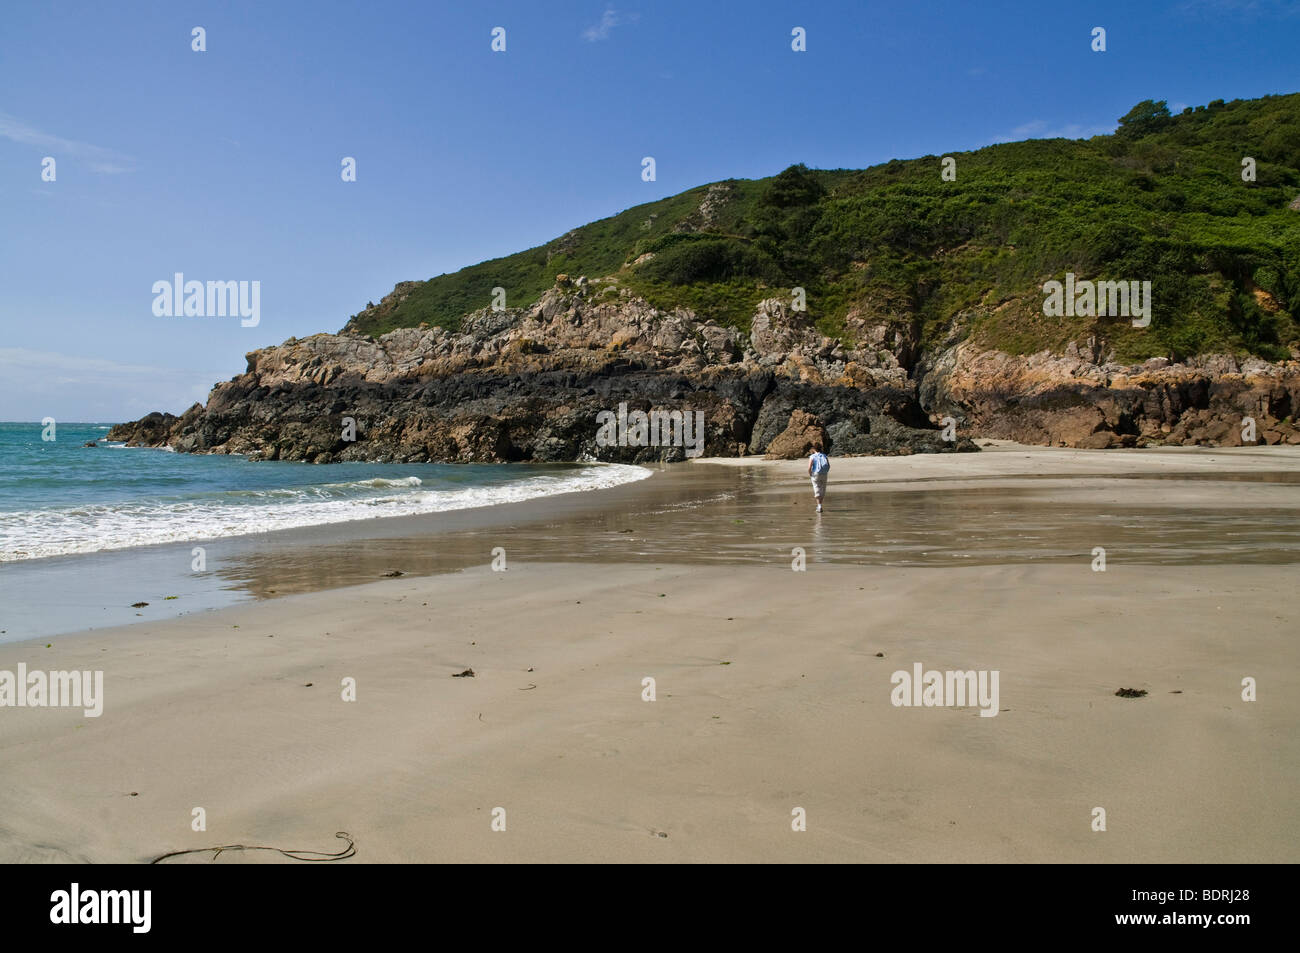 dh Petit Bot Bay FOREST GUERNSEY Woman tourist walking along shore sandy beach channel islands one alone walker person Stock Photo